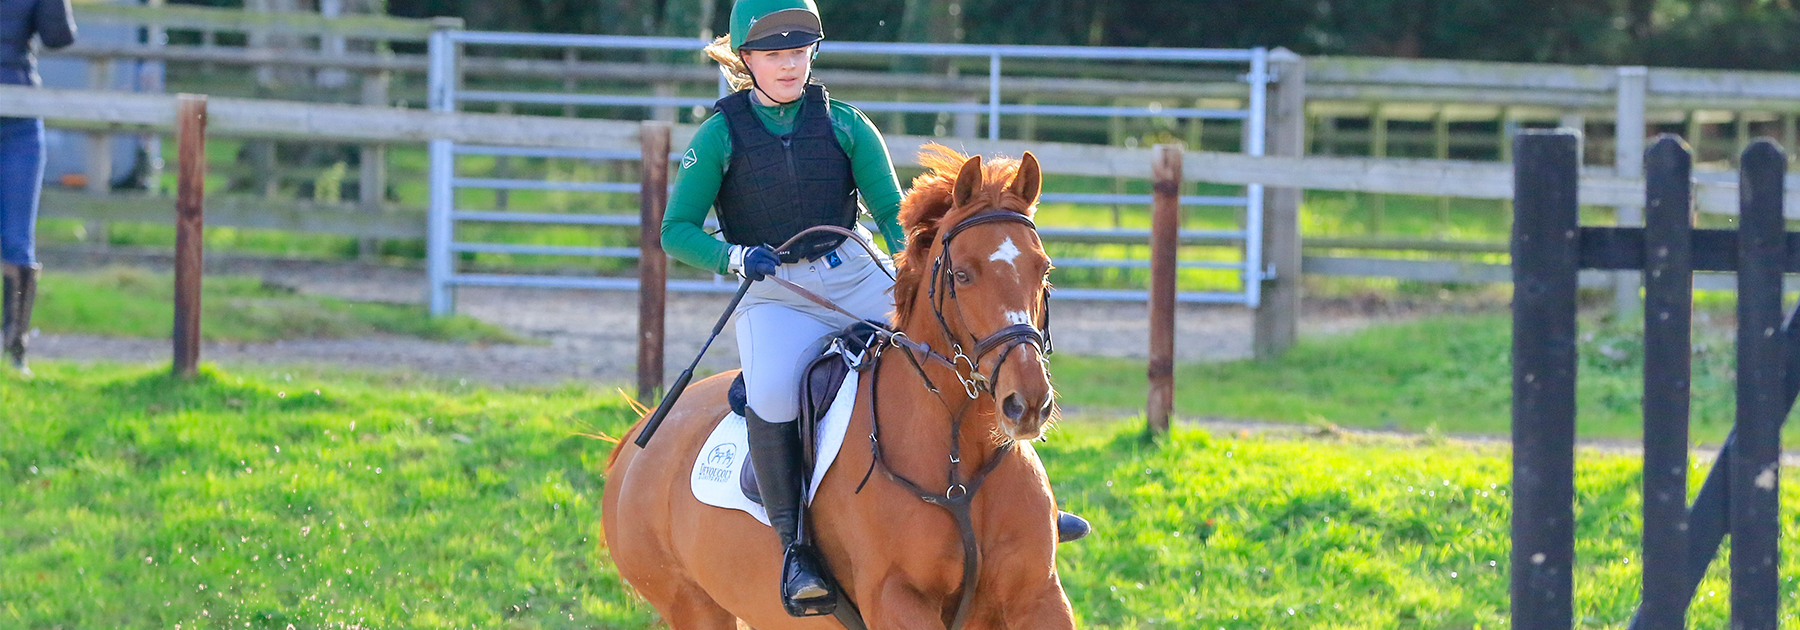 National Schools Equestrian Association Competition